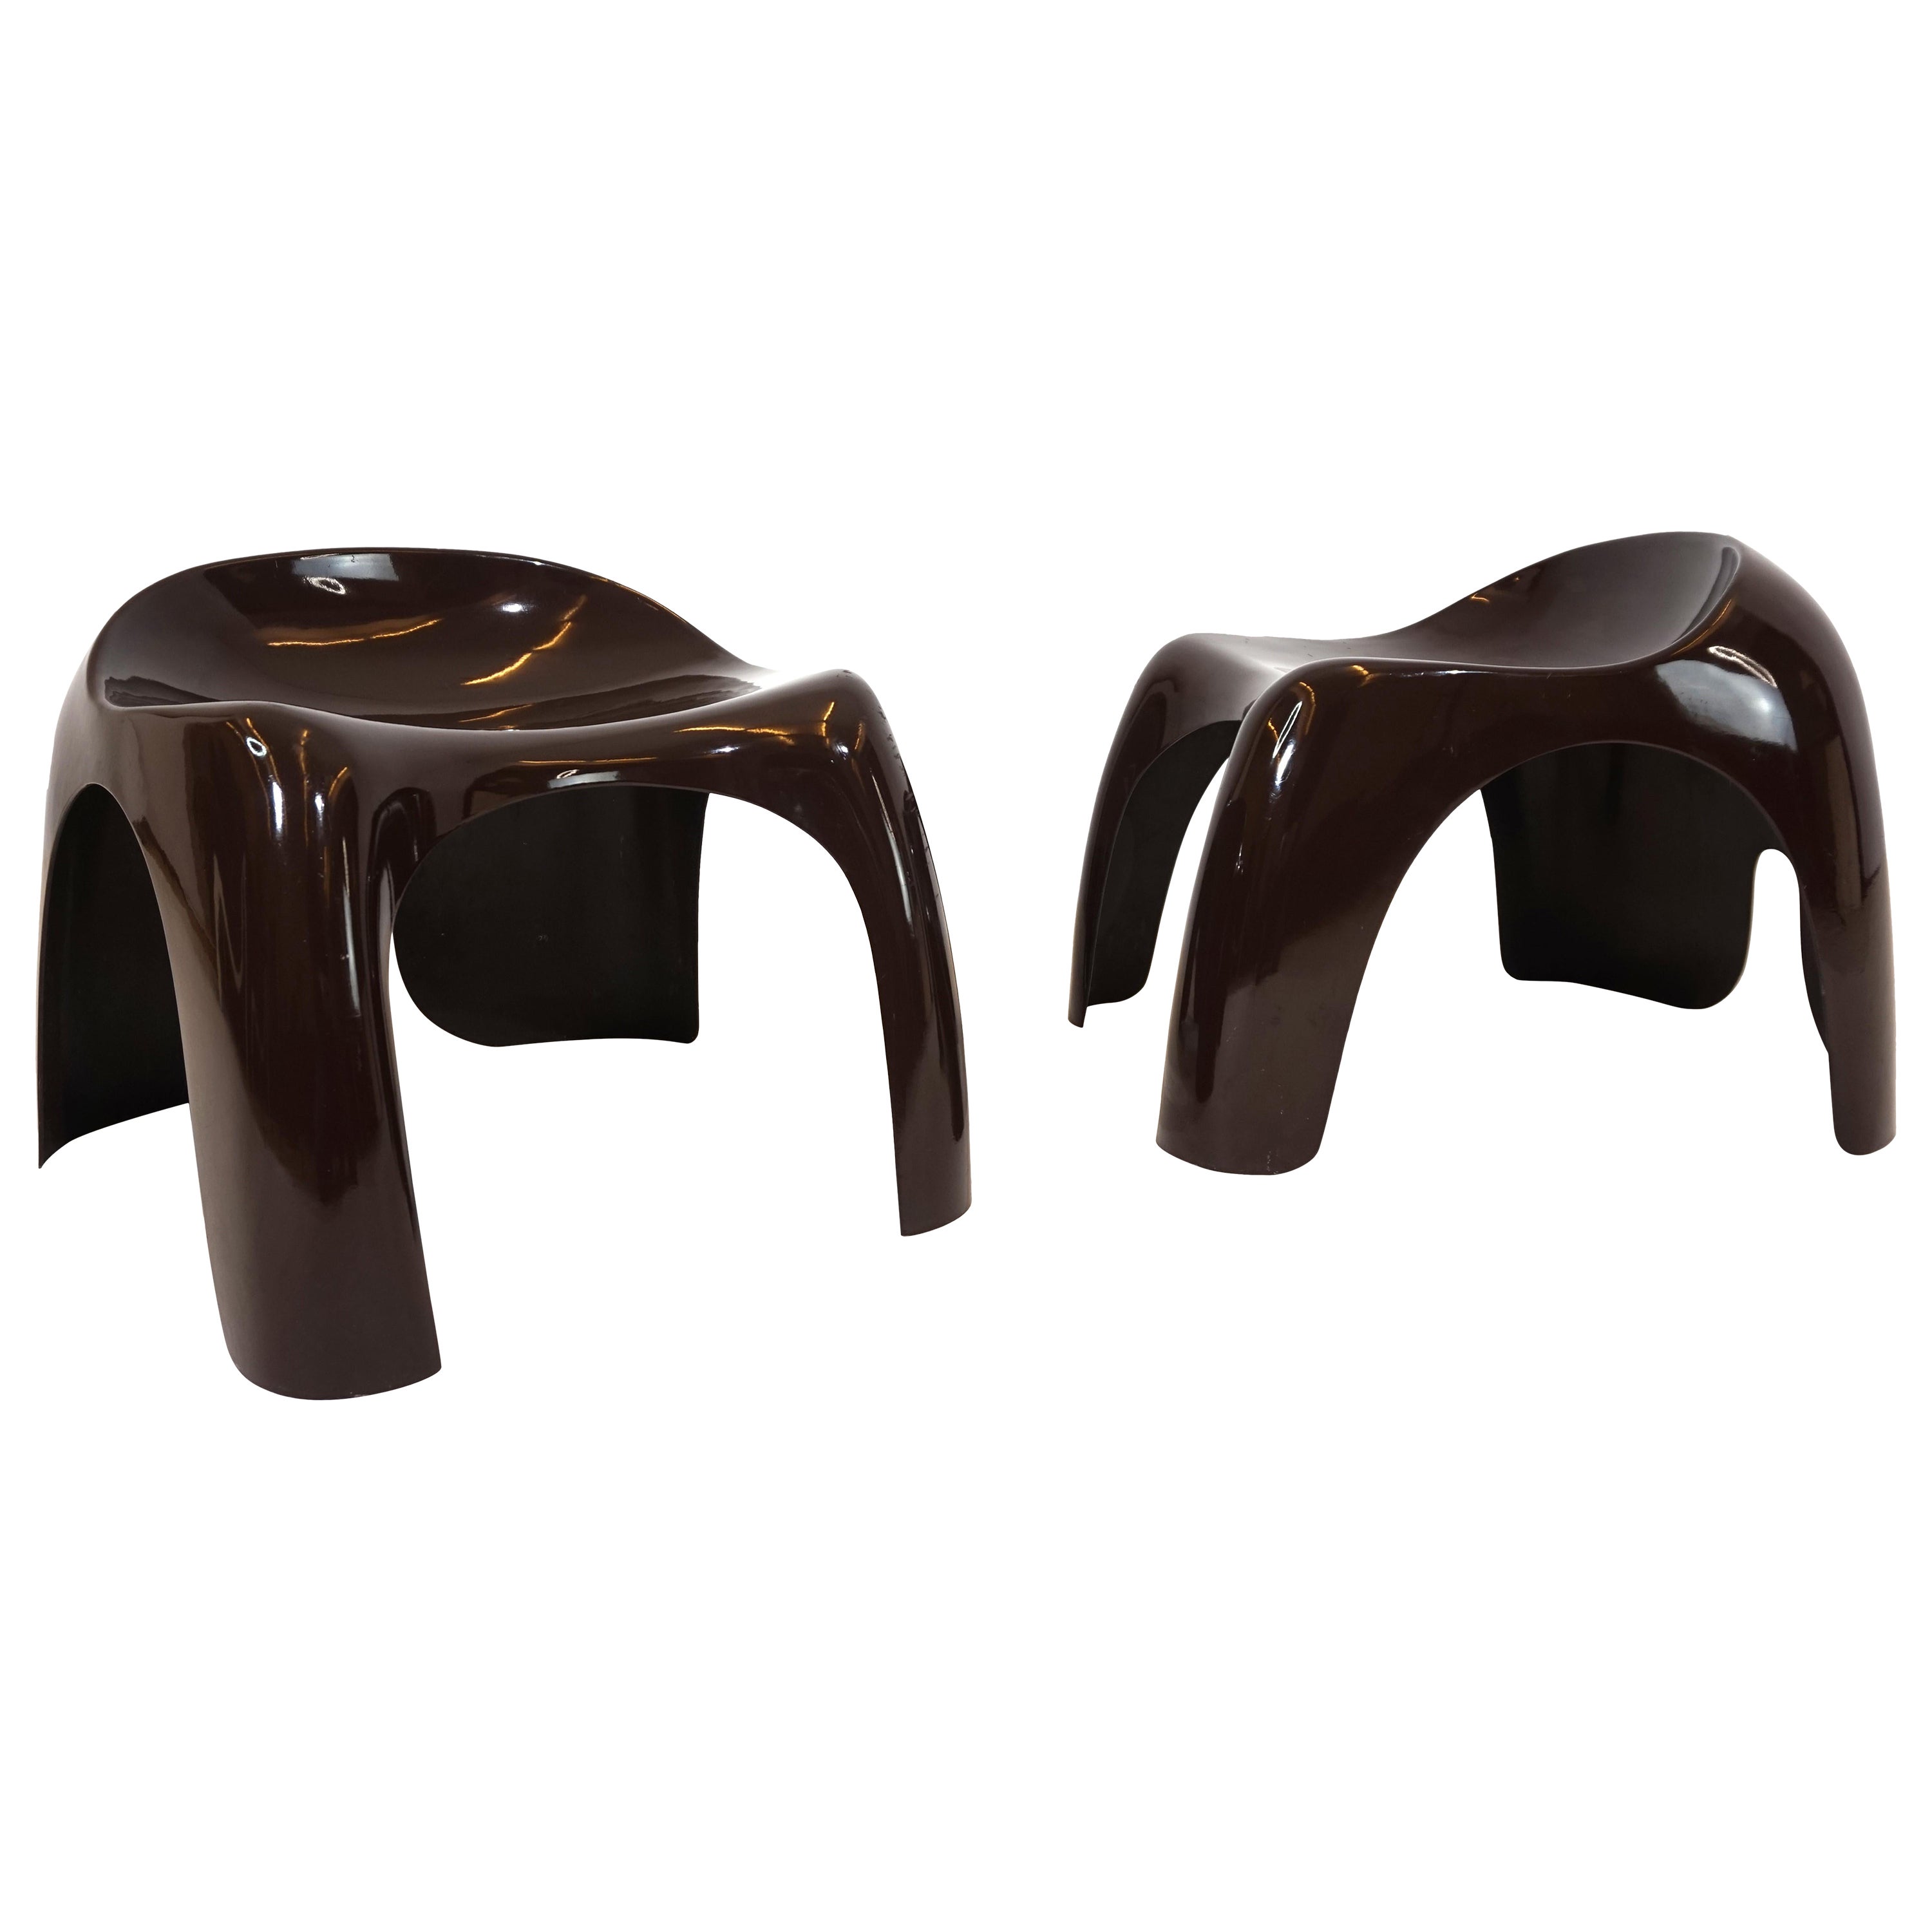 Artemide Efebo set of 2 plastic stools Space Age by Stacy Dukes